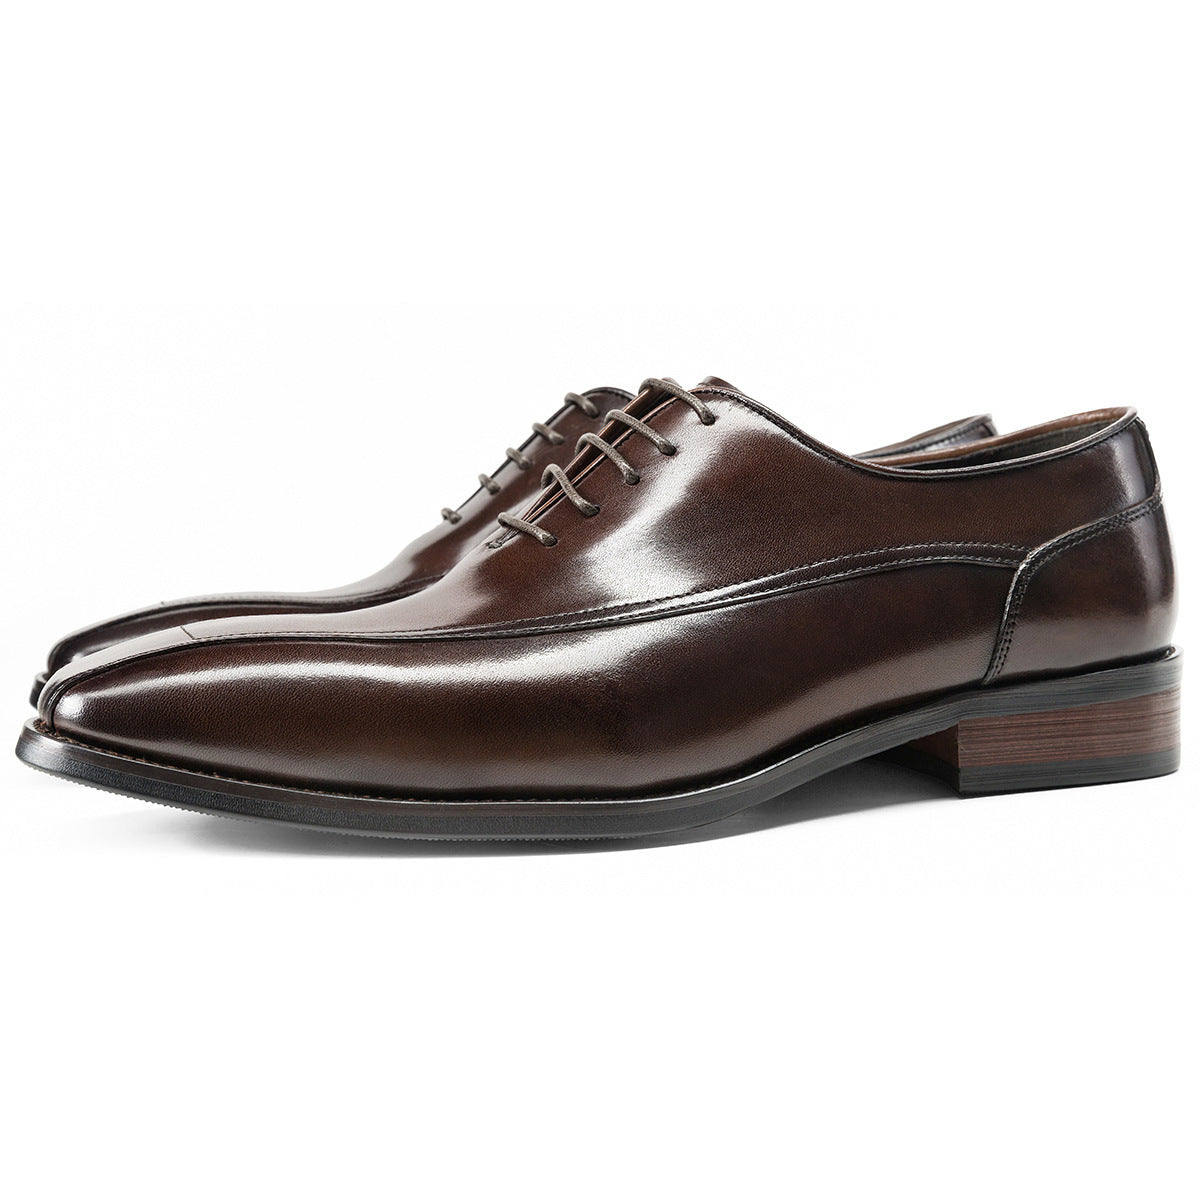 Leather Oxford Shoes Men's Shoes FREE DELIVERY 4-9 DAYS